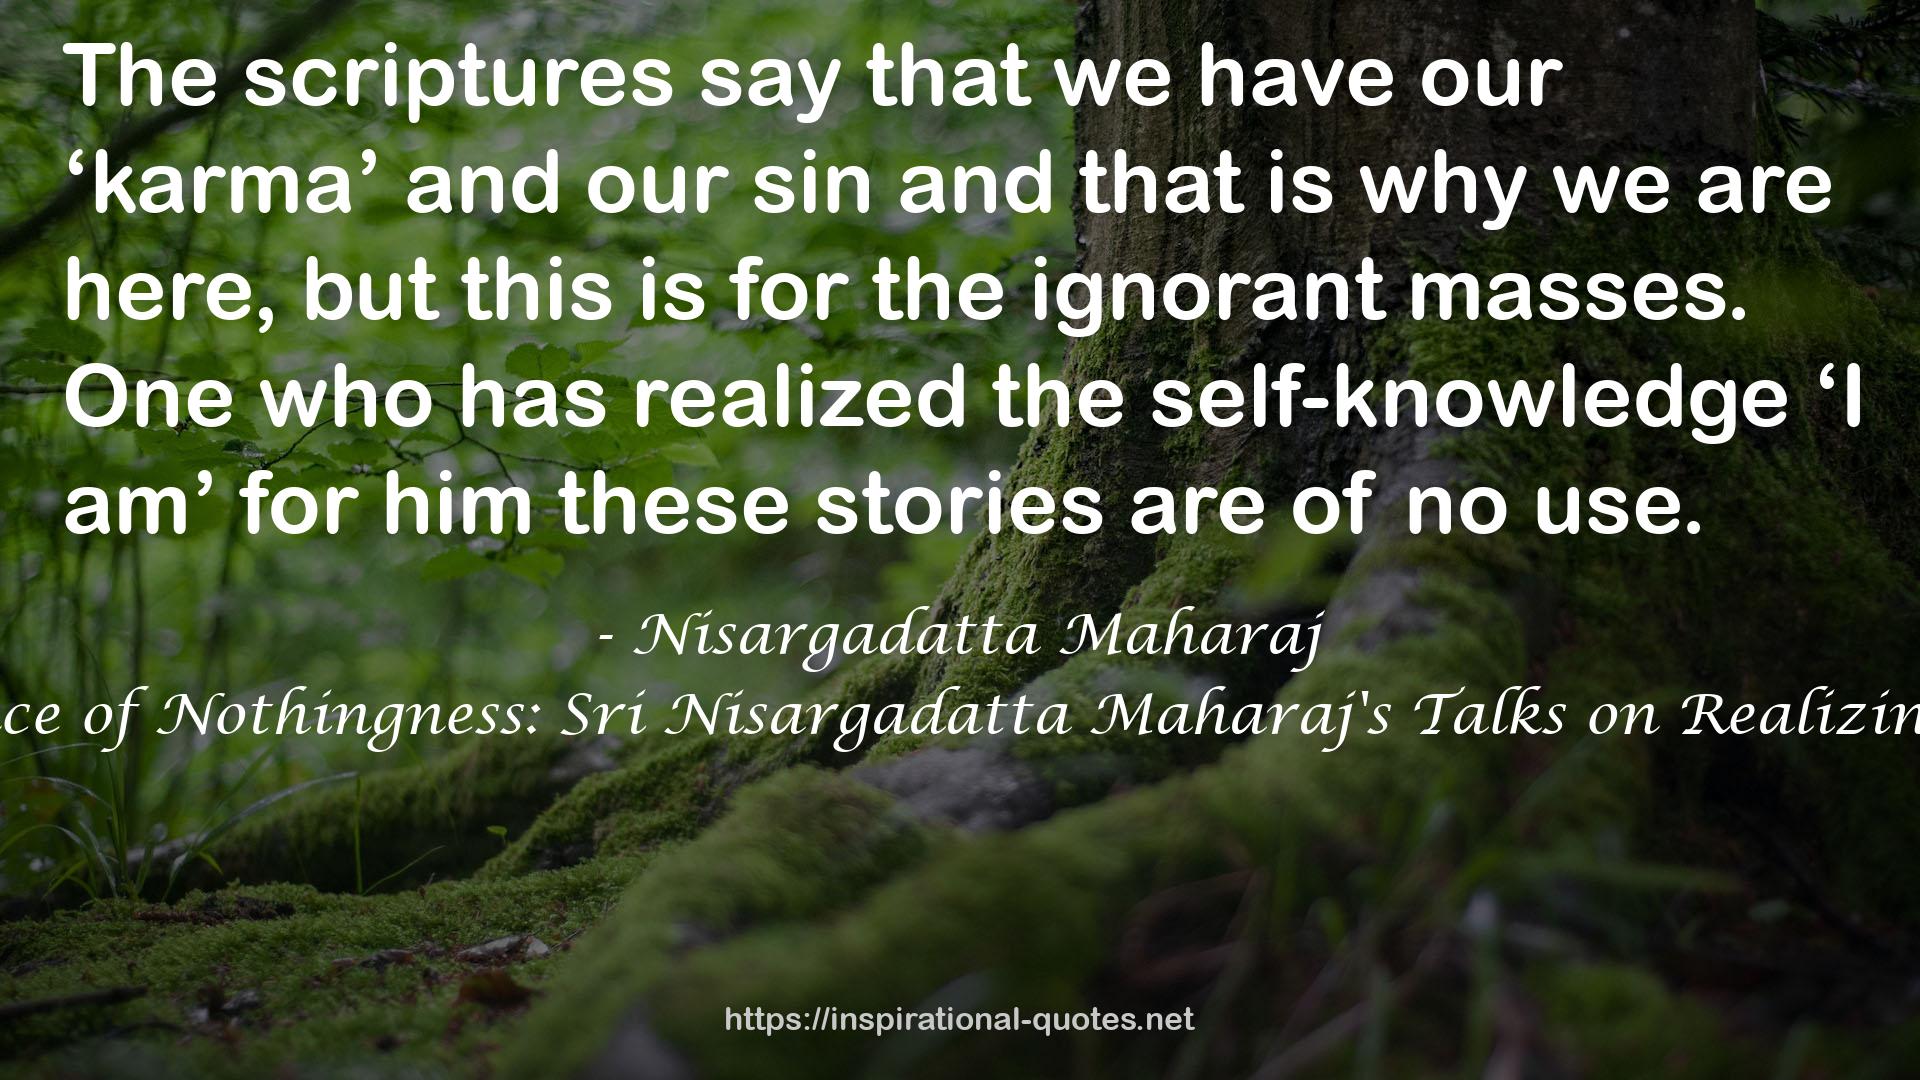 The Experience of Nothingness: Sri Nisargadatta Maharaj's Talks on Realizing the Infinite QUOTES